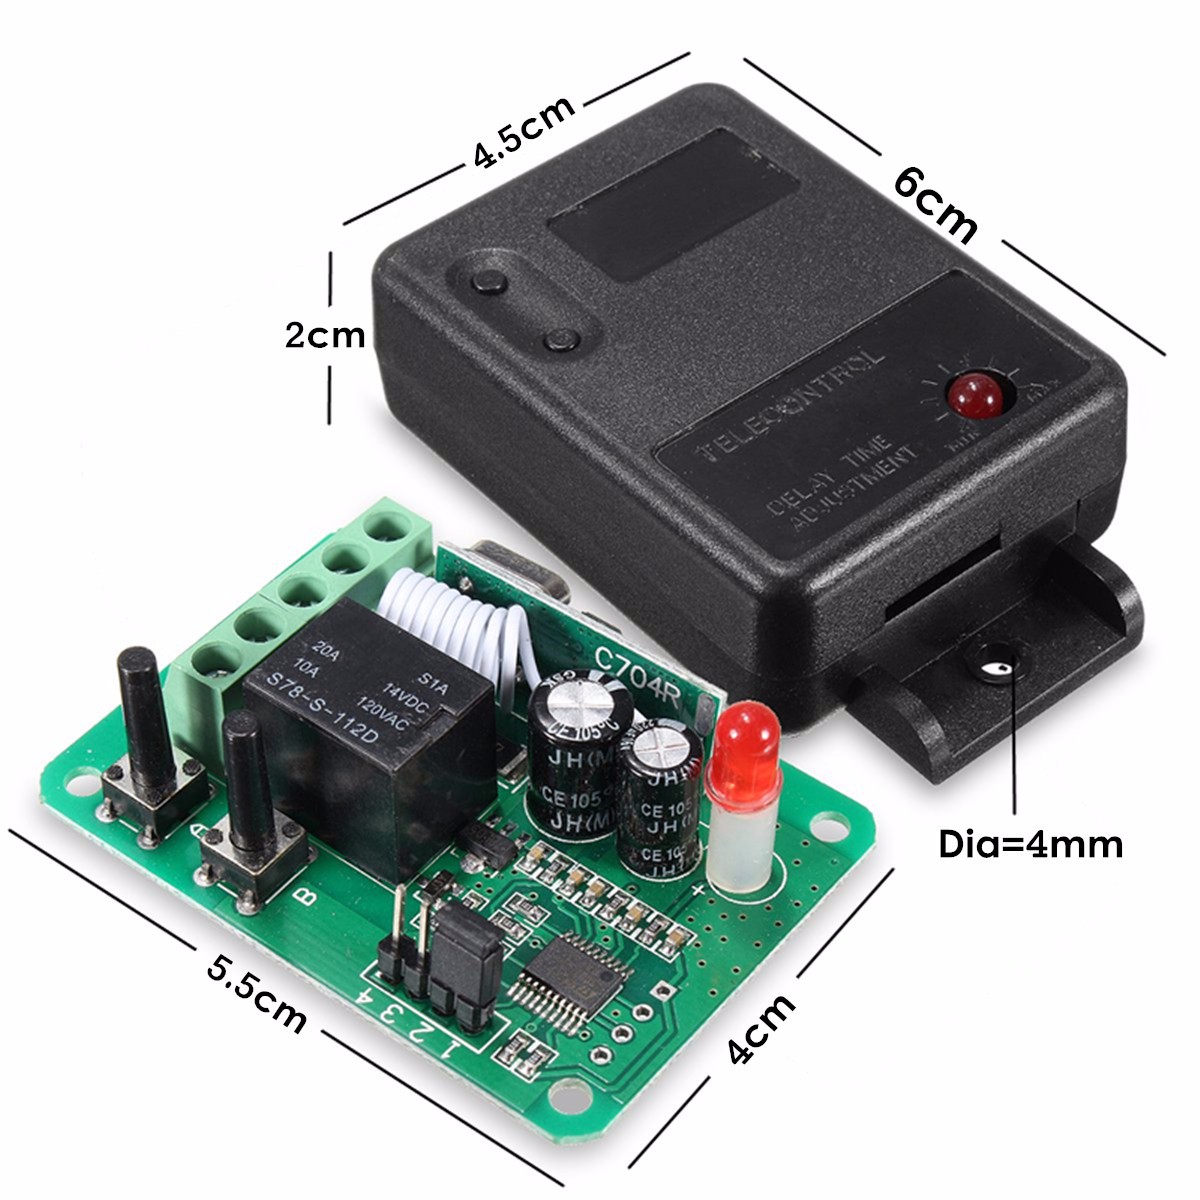 DC12V-1CH-315433MHz-Wireless-Time-Delay-Relay-RF-Remote-Control-Switch-Receiver-1150044-6